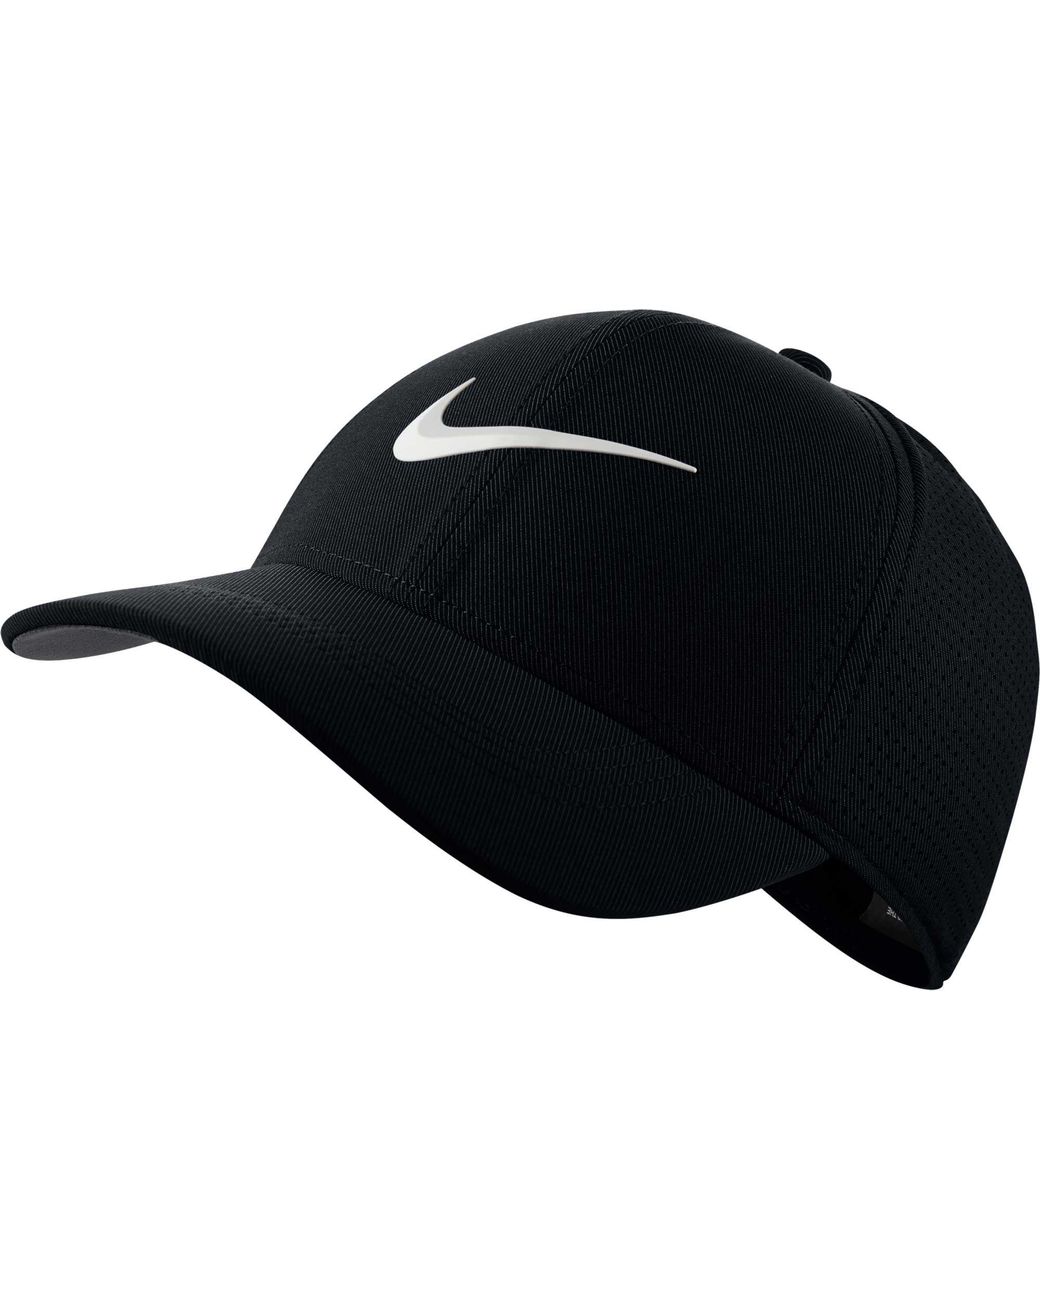 Nike Legacy 91 Perforated Golf Hat in Black for Men - Save 25% - Lyst